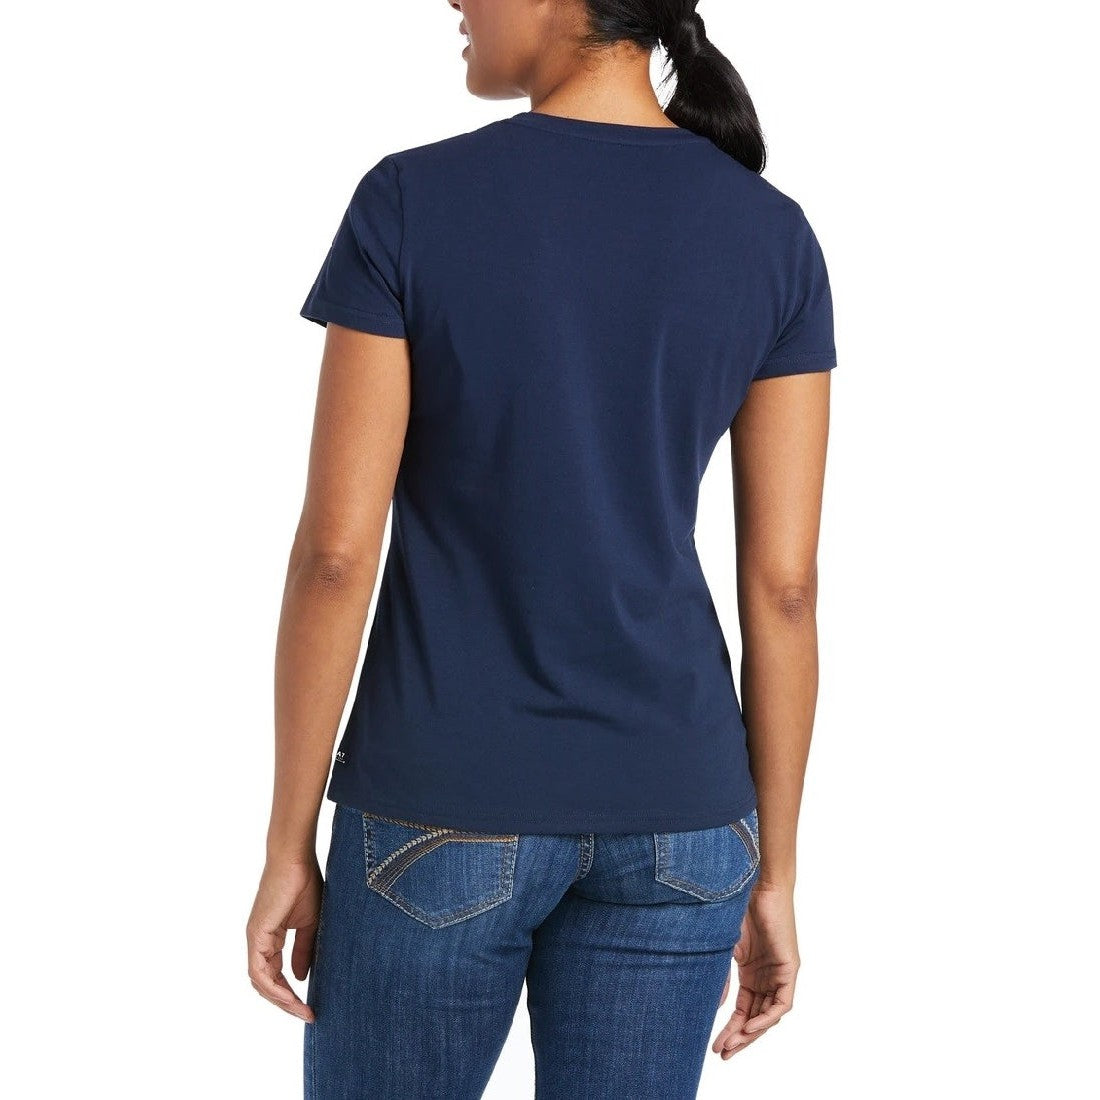 Ariat Tee Shirt Authentic Logo Short Sleeve S21 Navy Ladies-Ascot Saddlery-The Equestrian